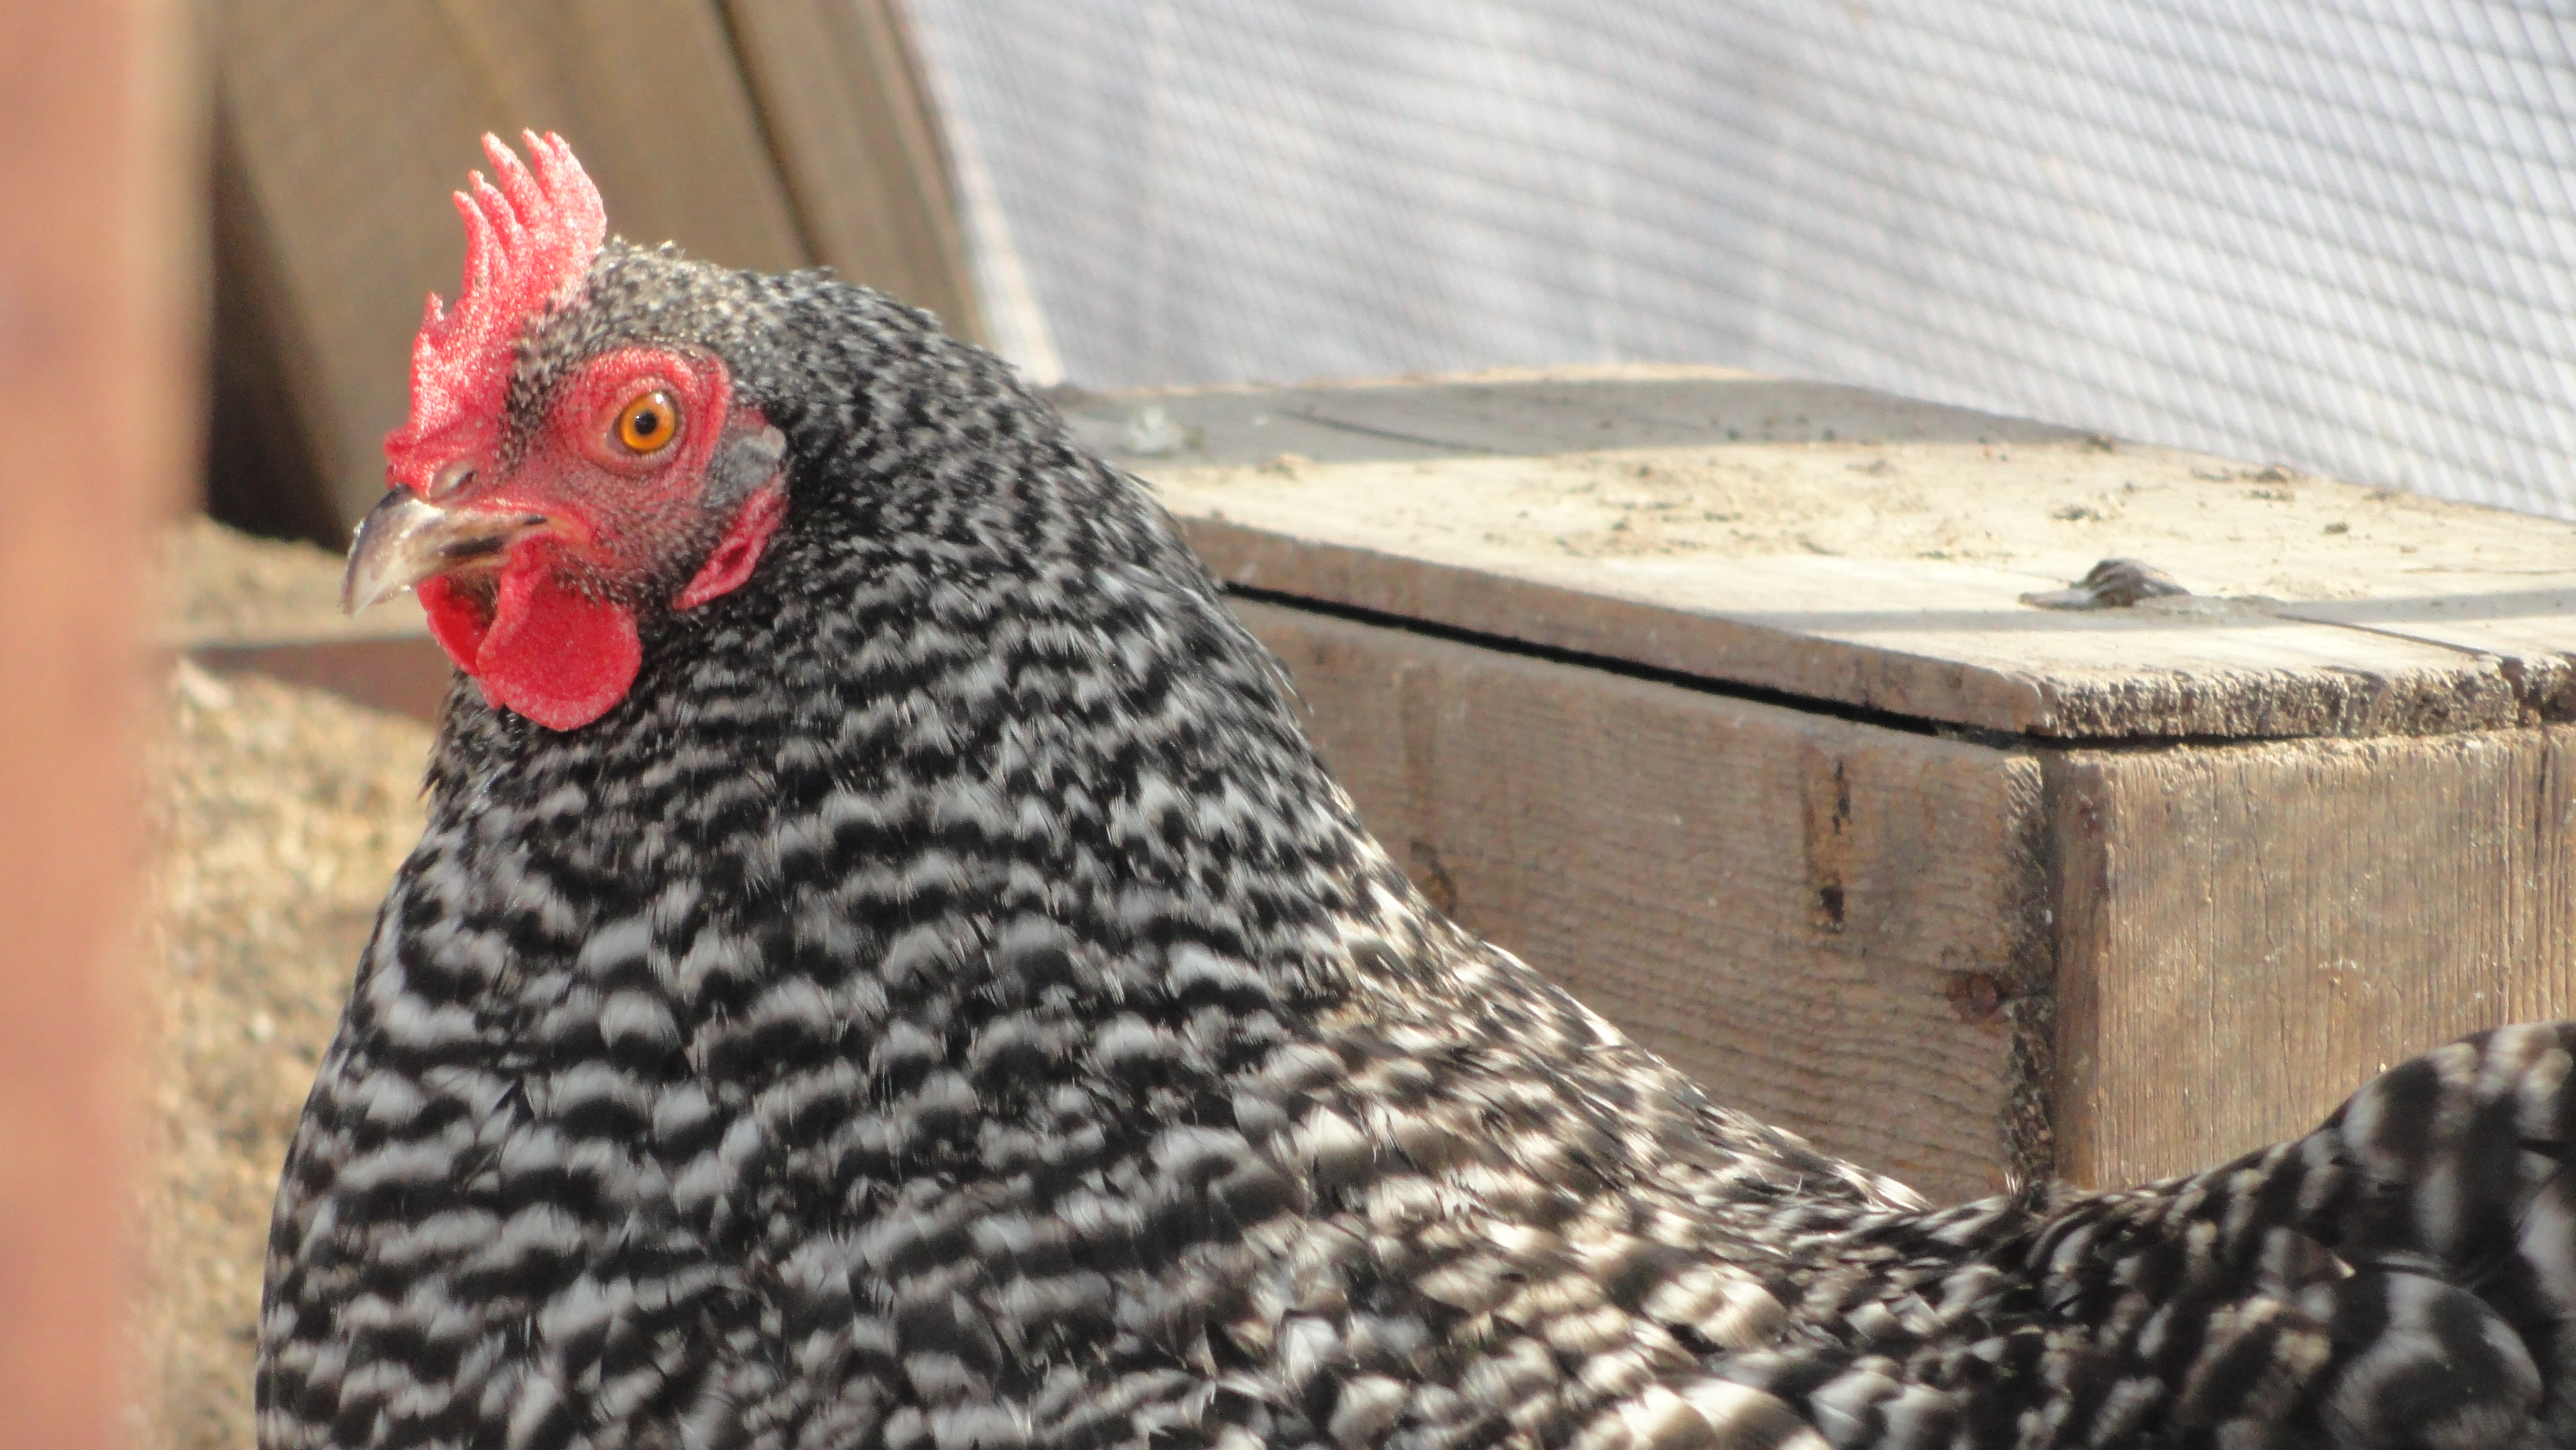 our Favorite chicken, Our Barred Rock, Myrtle May